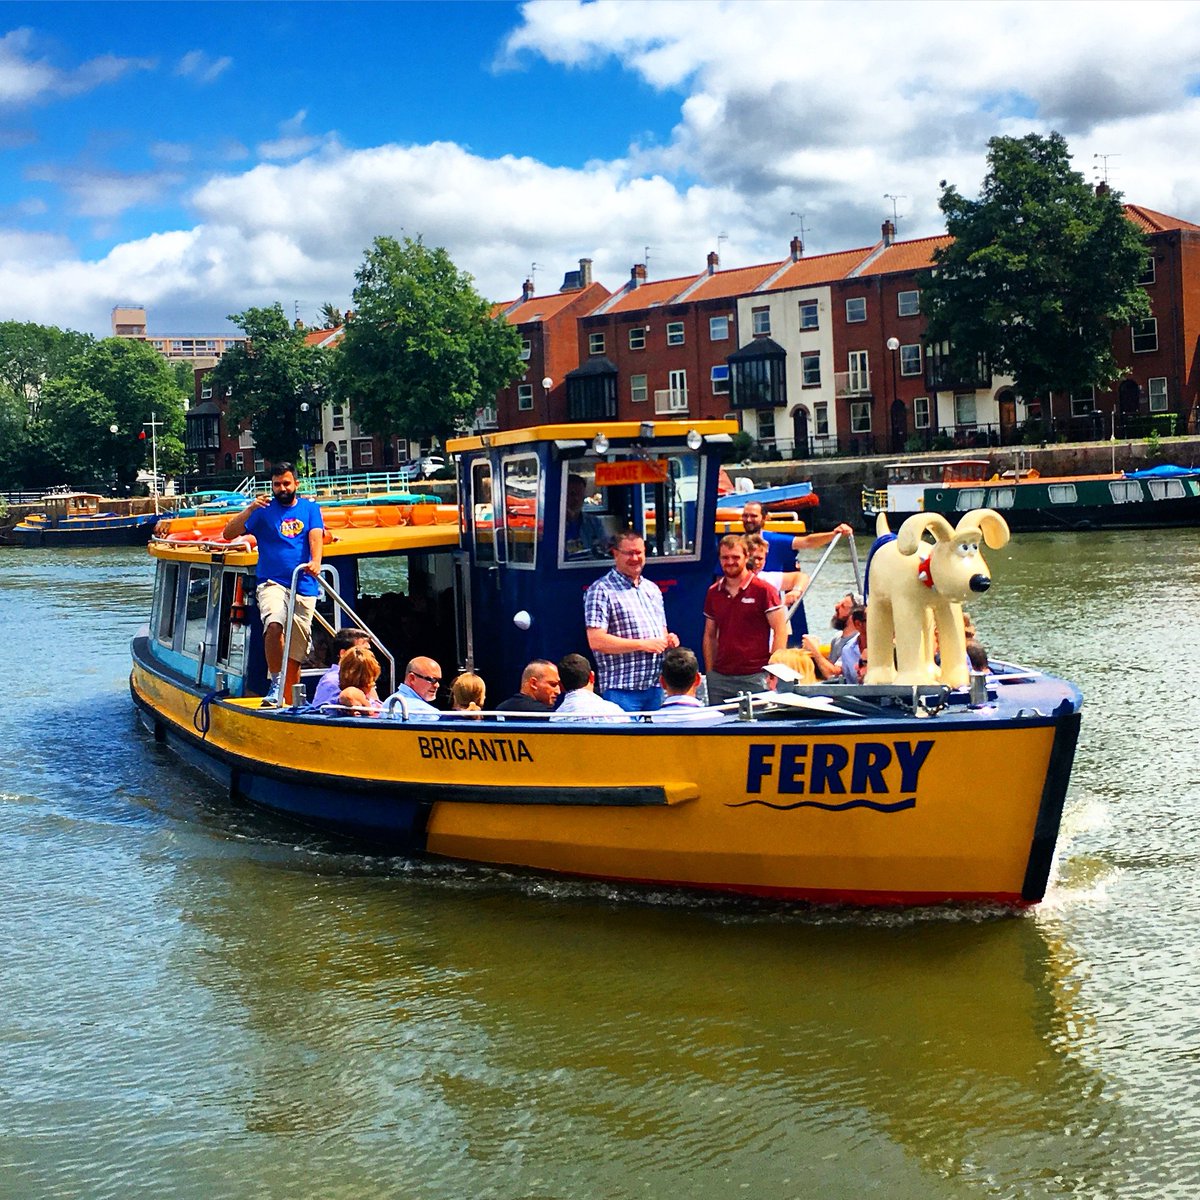 Underfall Yard and Bristol Ferry have teamed up to offer a free virtual tour of the Harbour on Tuesday April 20th. To join please register on Eventbrite: bit.ly/2QYOKYO @martr101 @VisitBristol @AliRVowles @mshedbristol @BristolFerry @whatsonbristol @BristolWalk